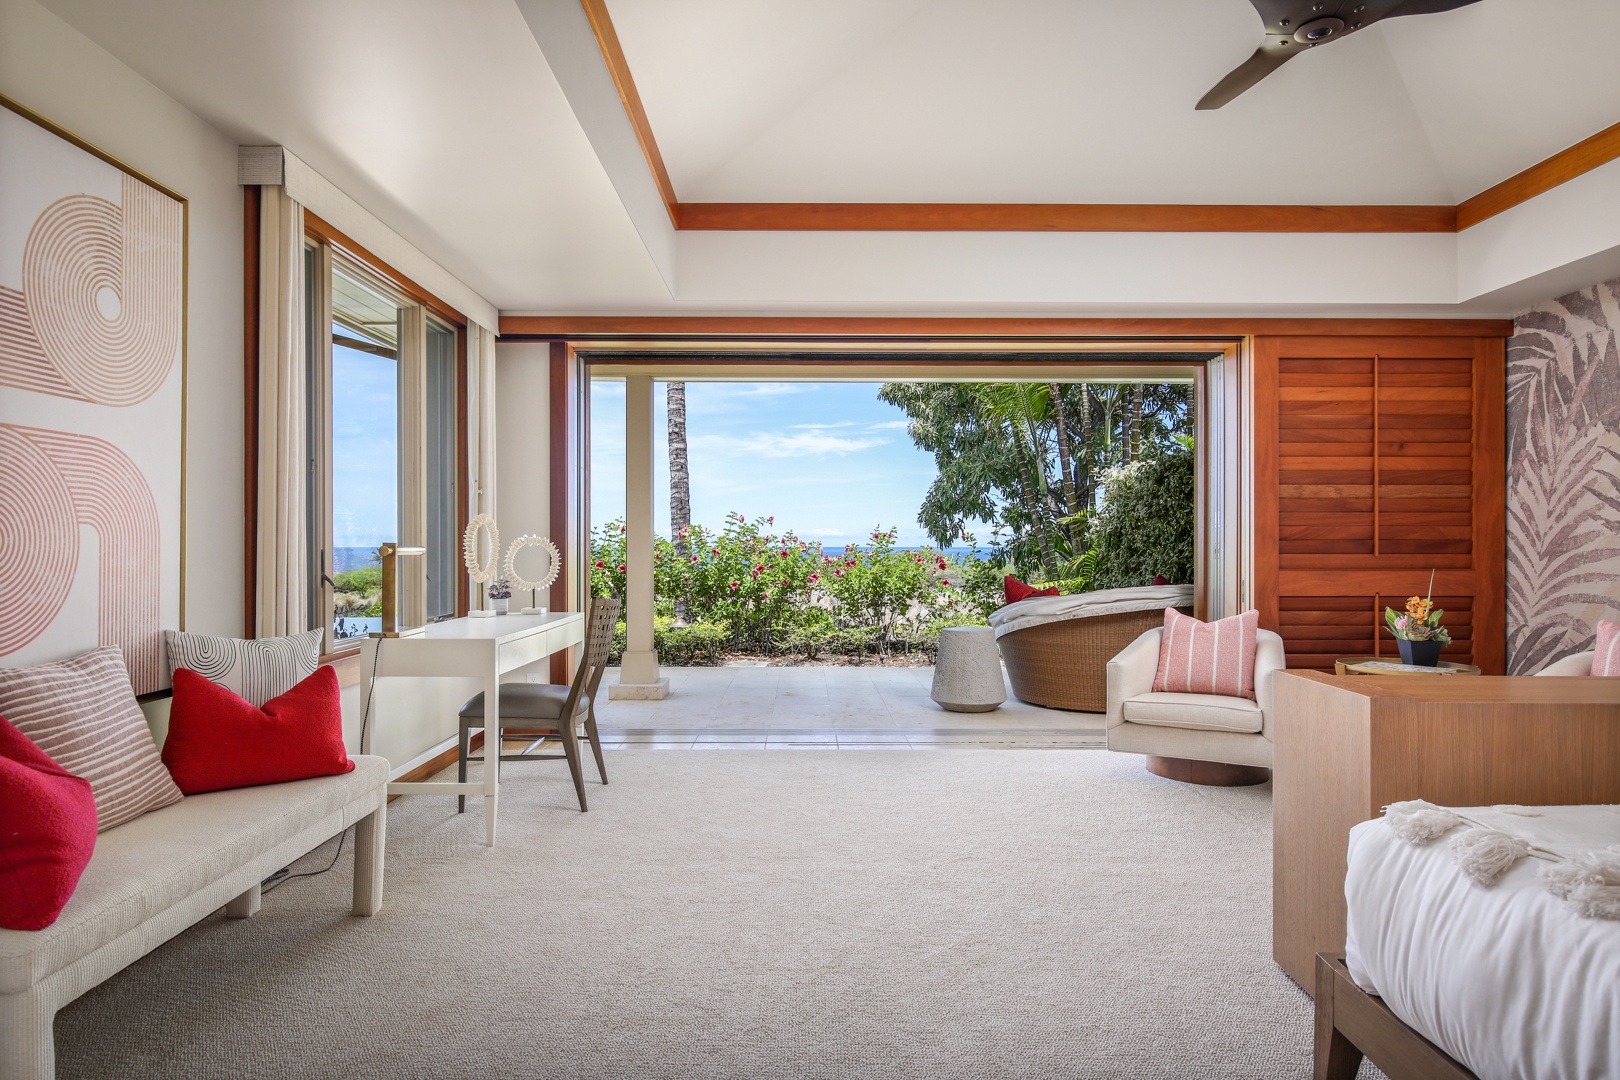 Kailua Kona Vacation Rentals, 4BD Hainoa Estate (122) at Four Seasons Resort at Hualalai - Ample seating including a desk + pocket doors to the primary suite’s own private lanai.